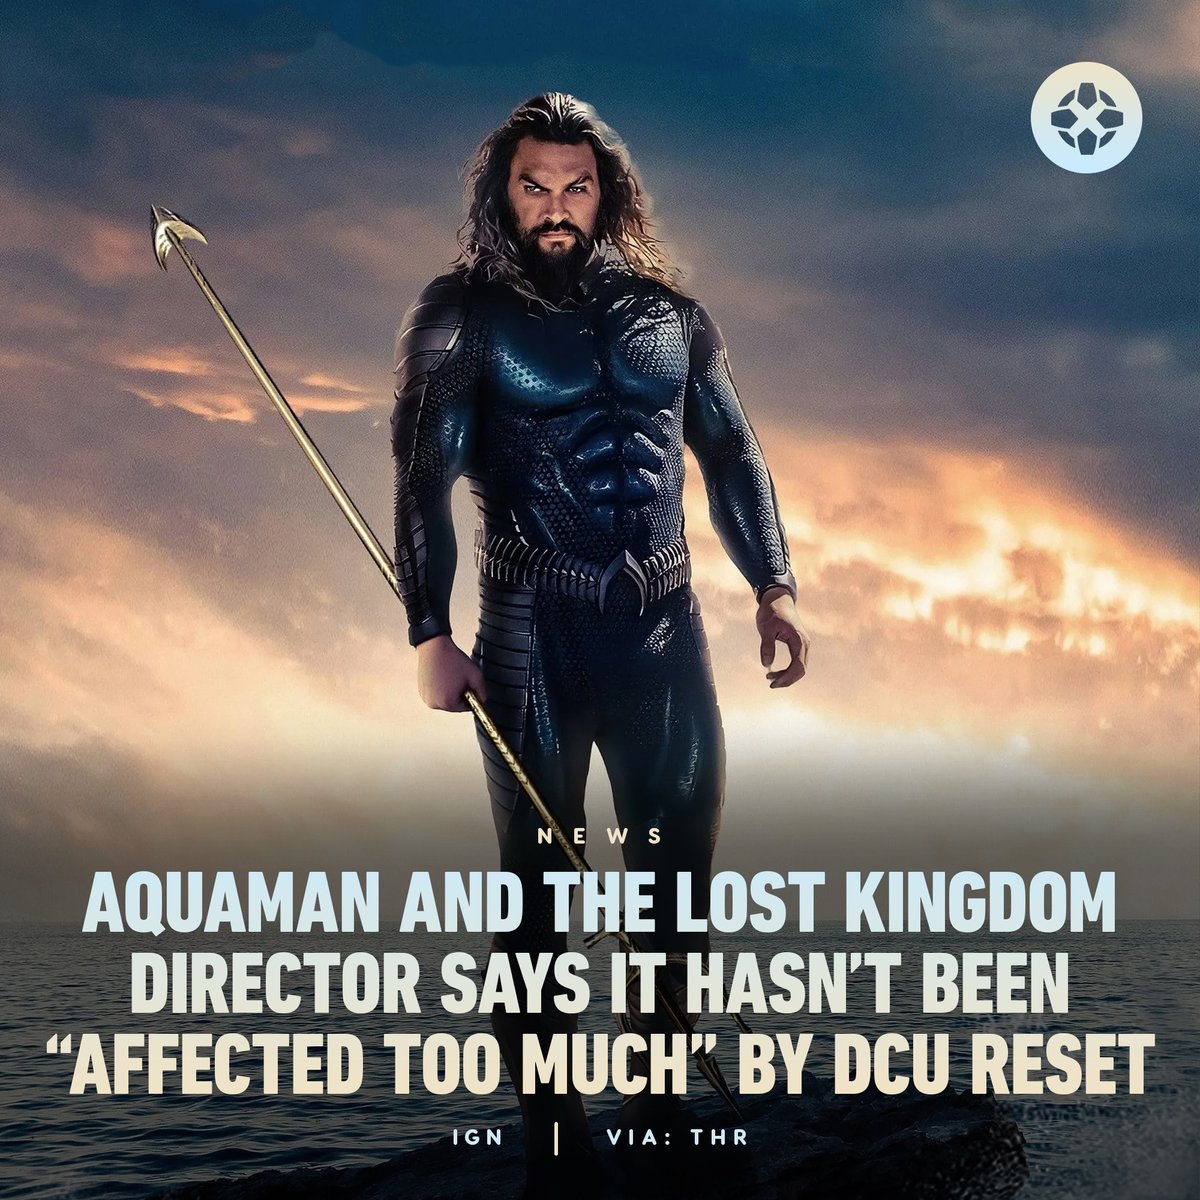 Aquaman and the Lost Kingdom director James Wan said the DC Universe’s big screen reset had little effect on his sequel's story, saying, 'fortunately, the Aquaman universe is pretty far removed from the rest of the world.' bit.ly/42k8XXZ